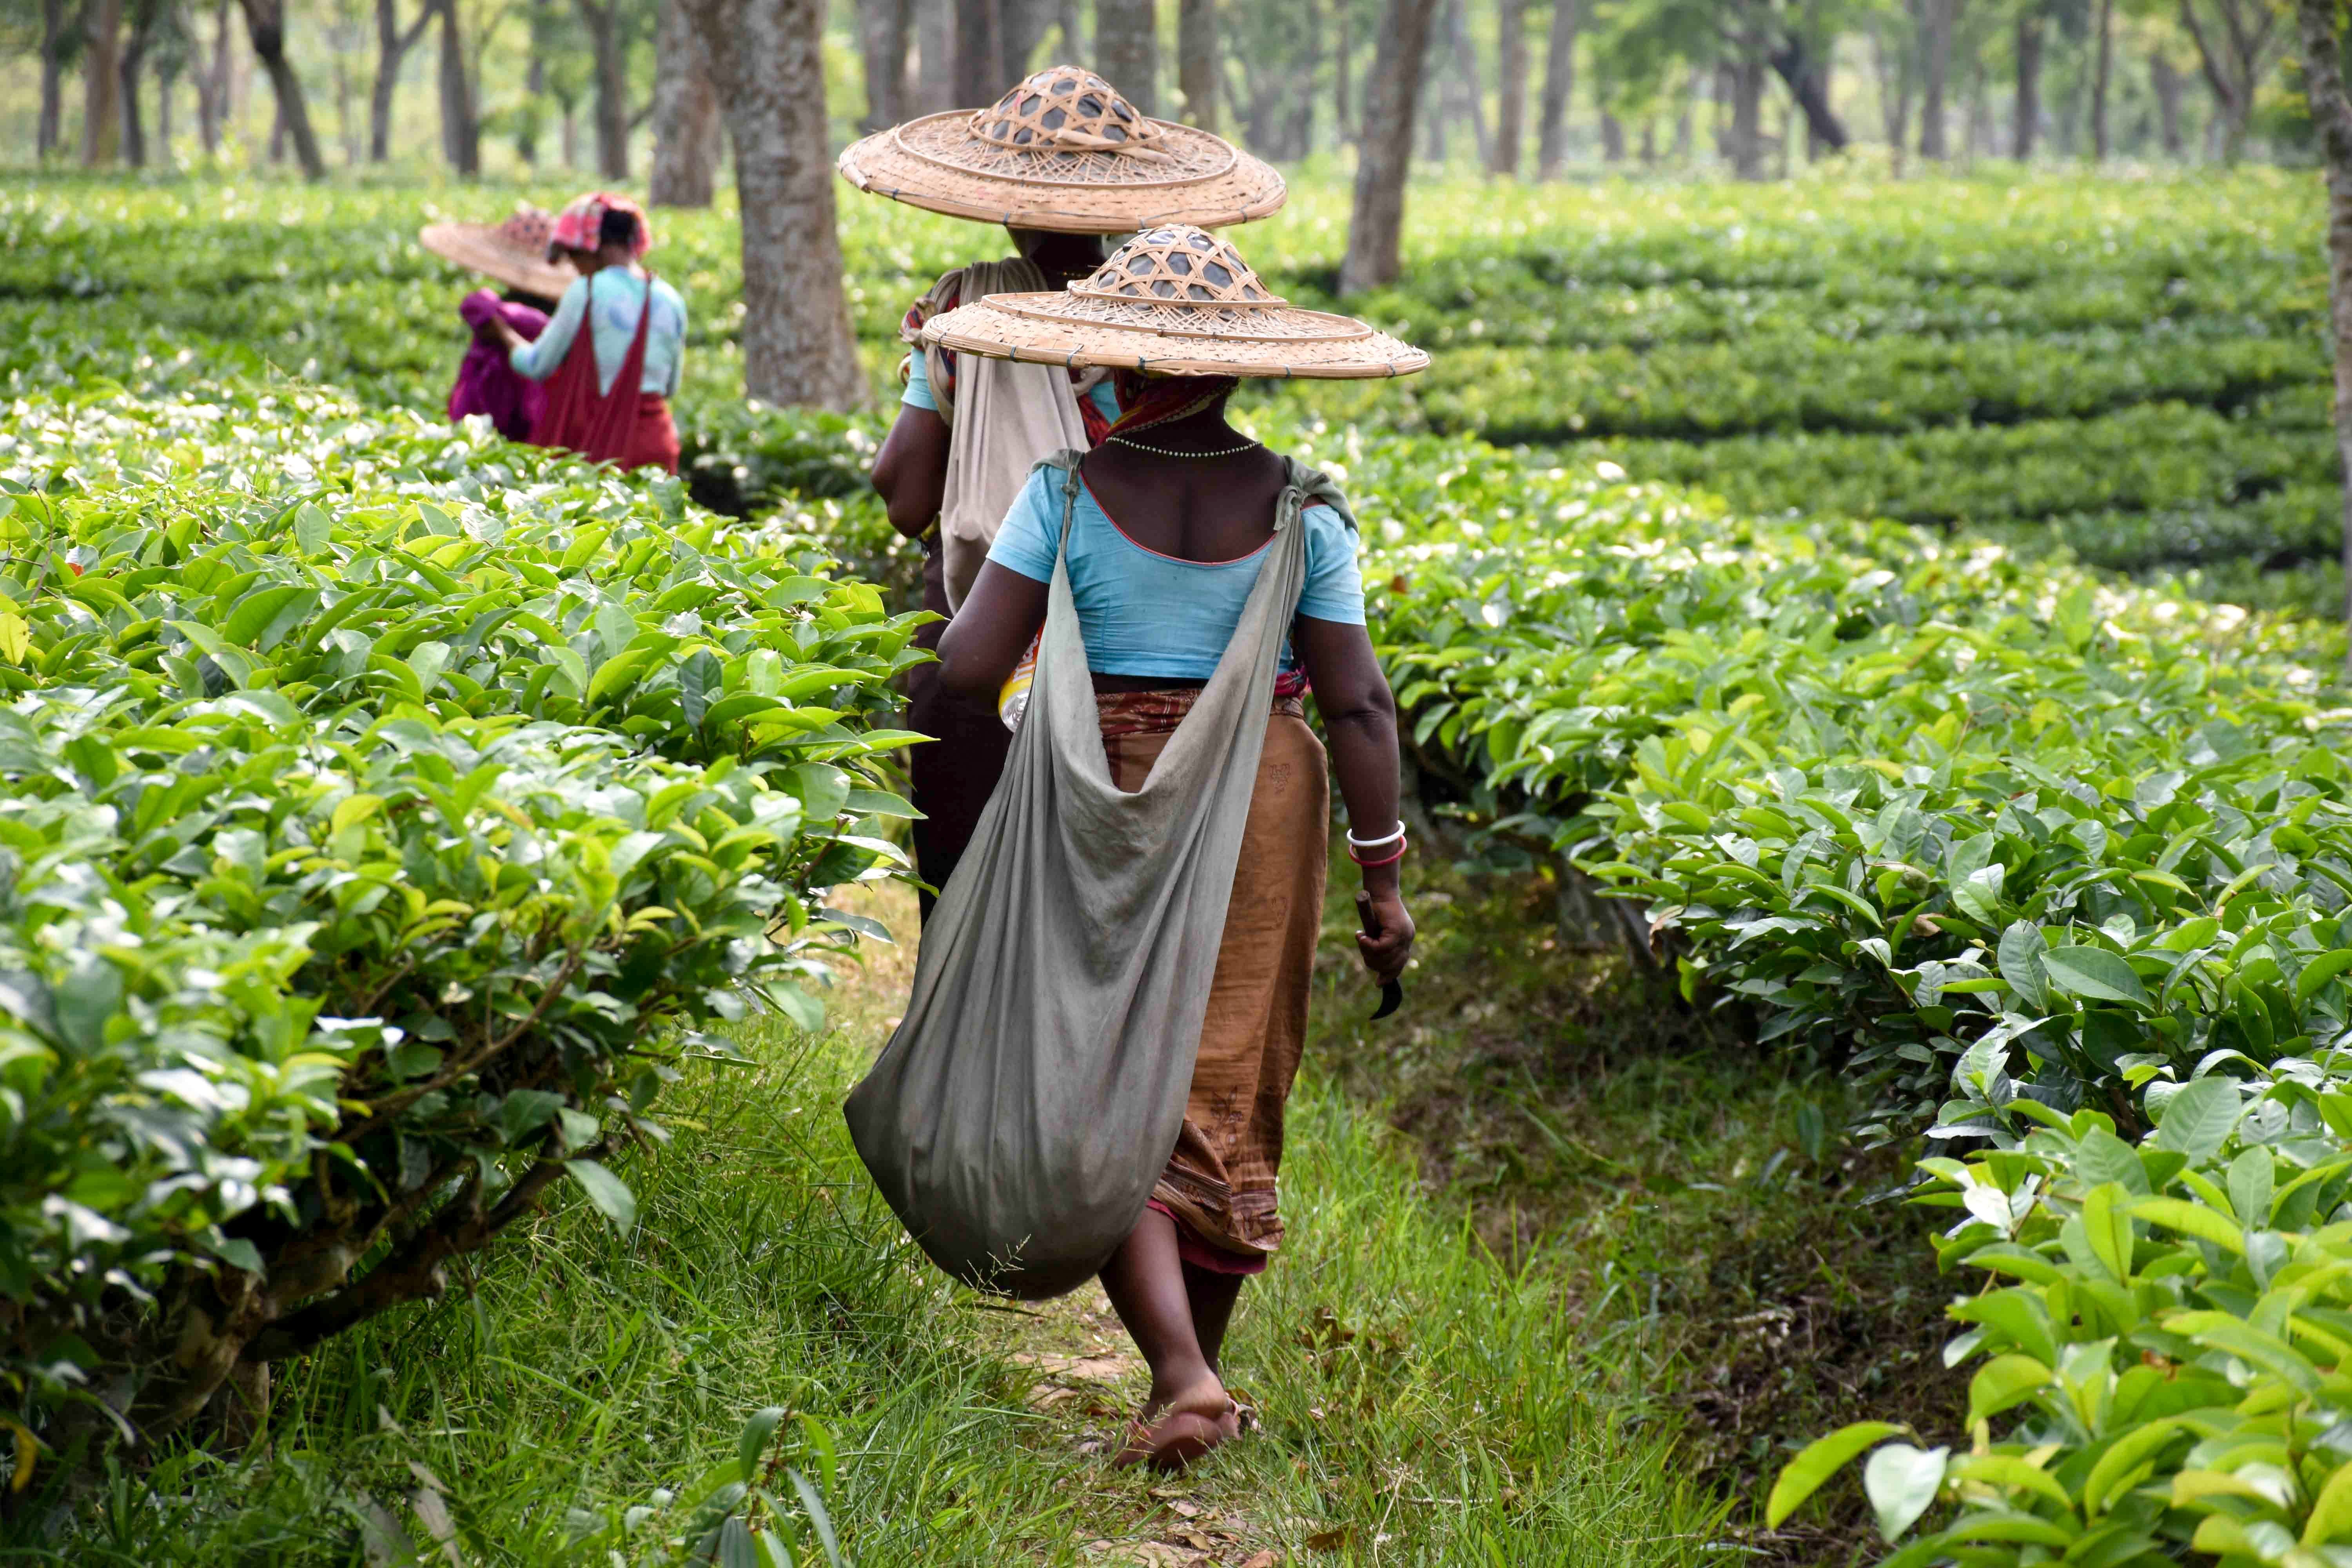 A tea plantation in India photographed in 2019.